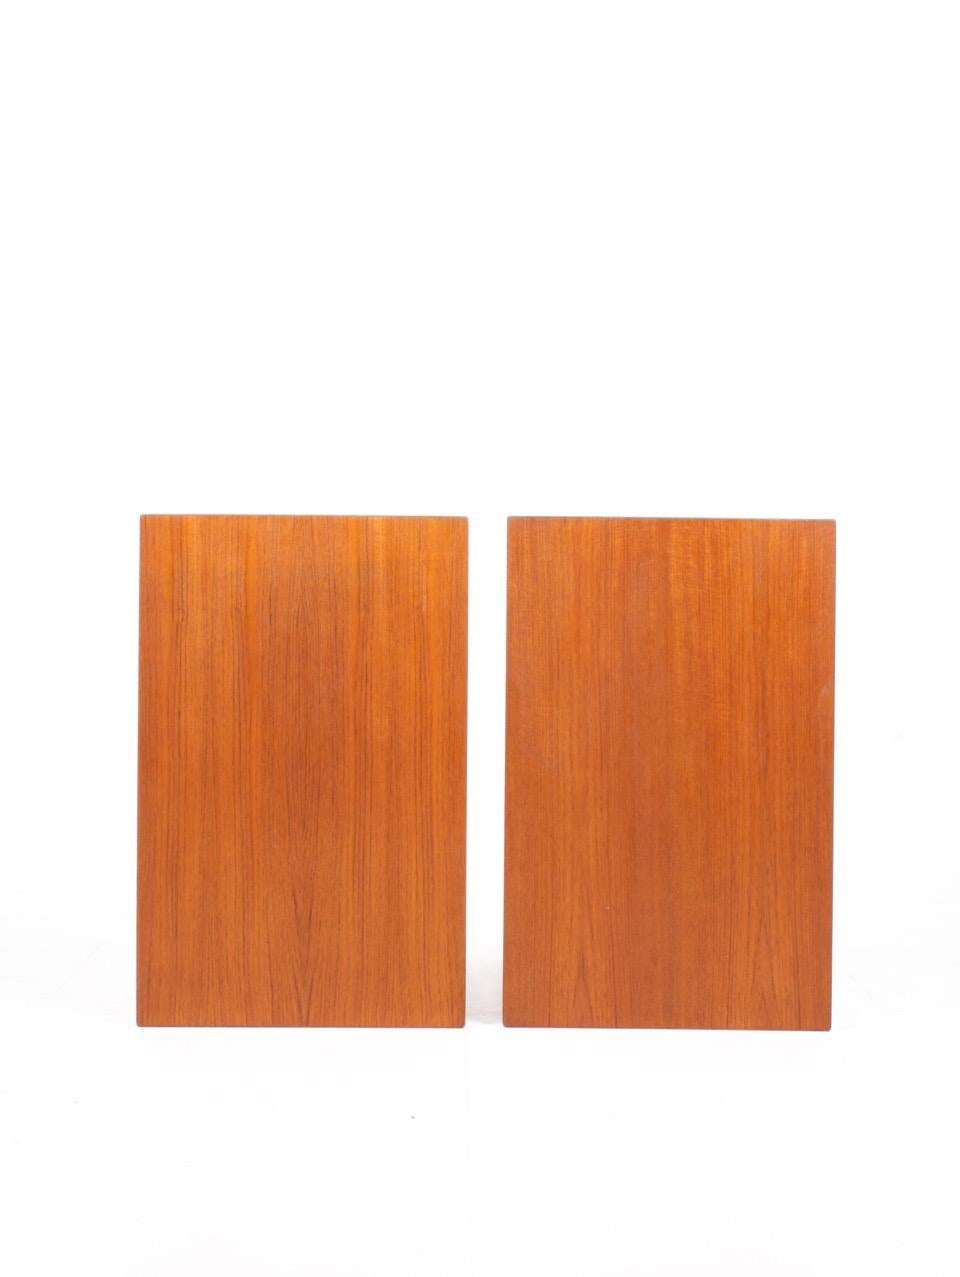 Pair of End Tables by Severin Hansen 1